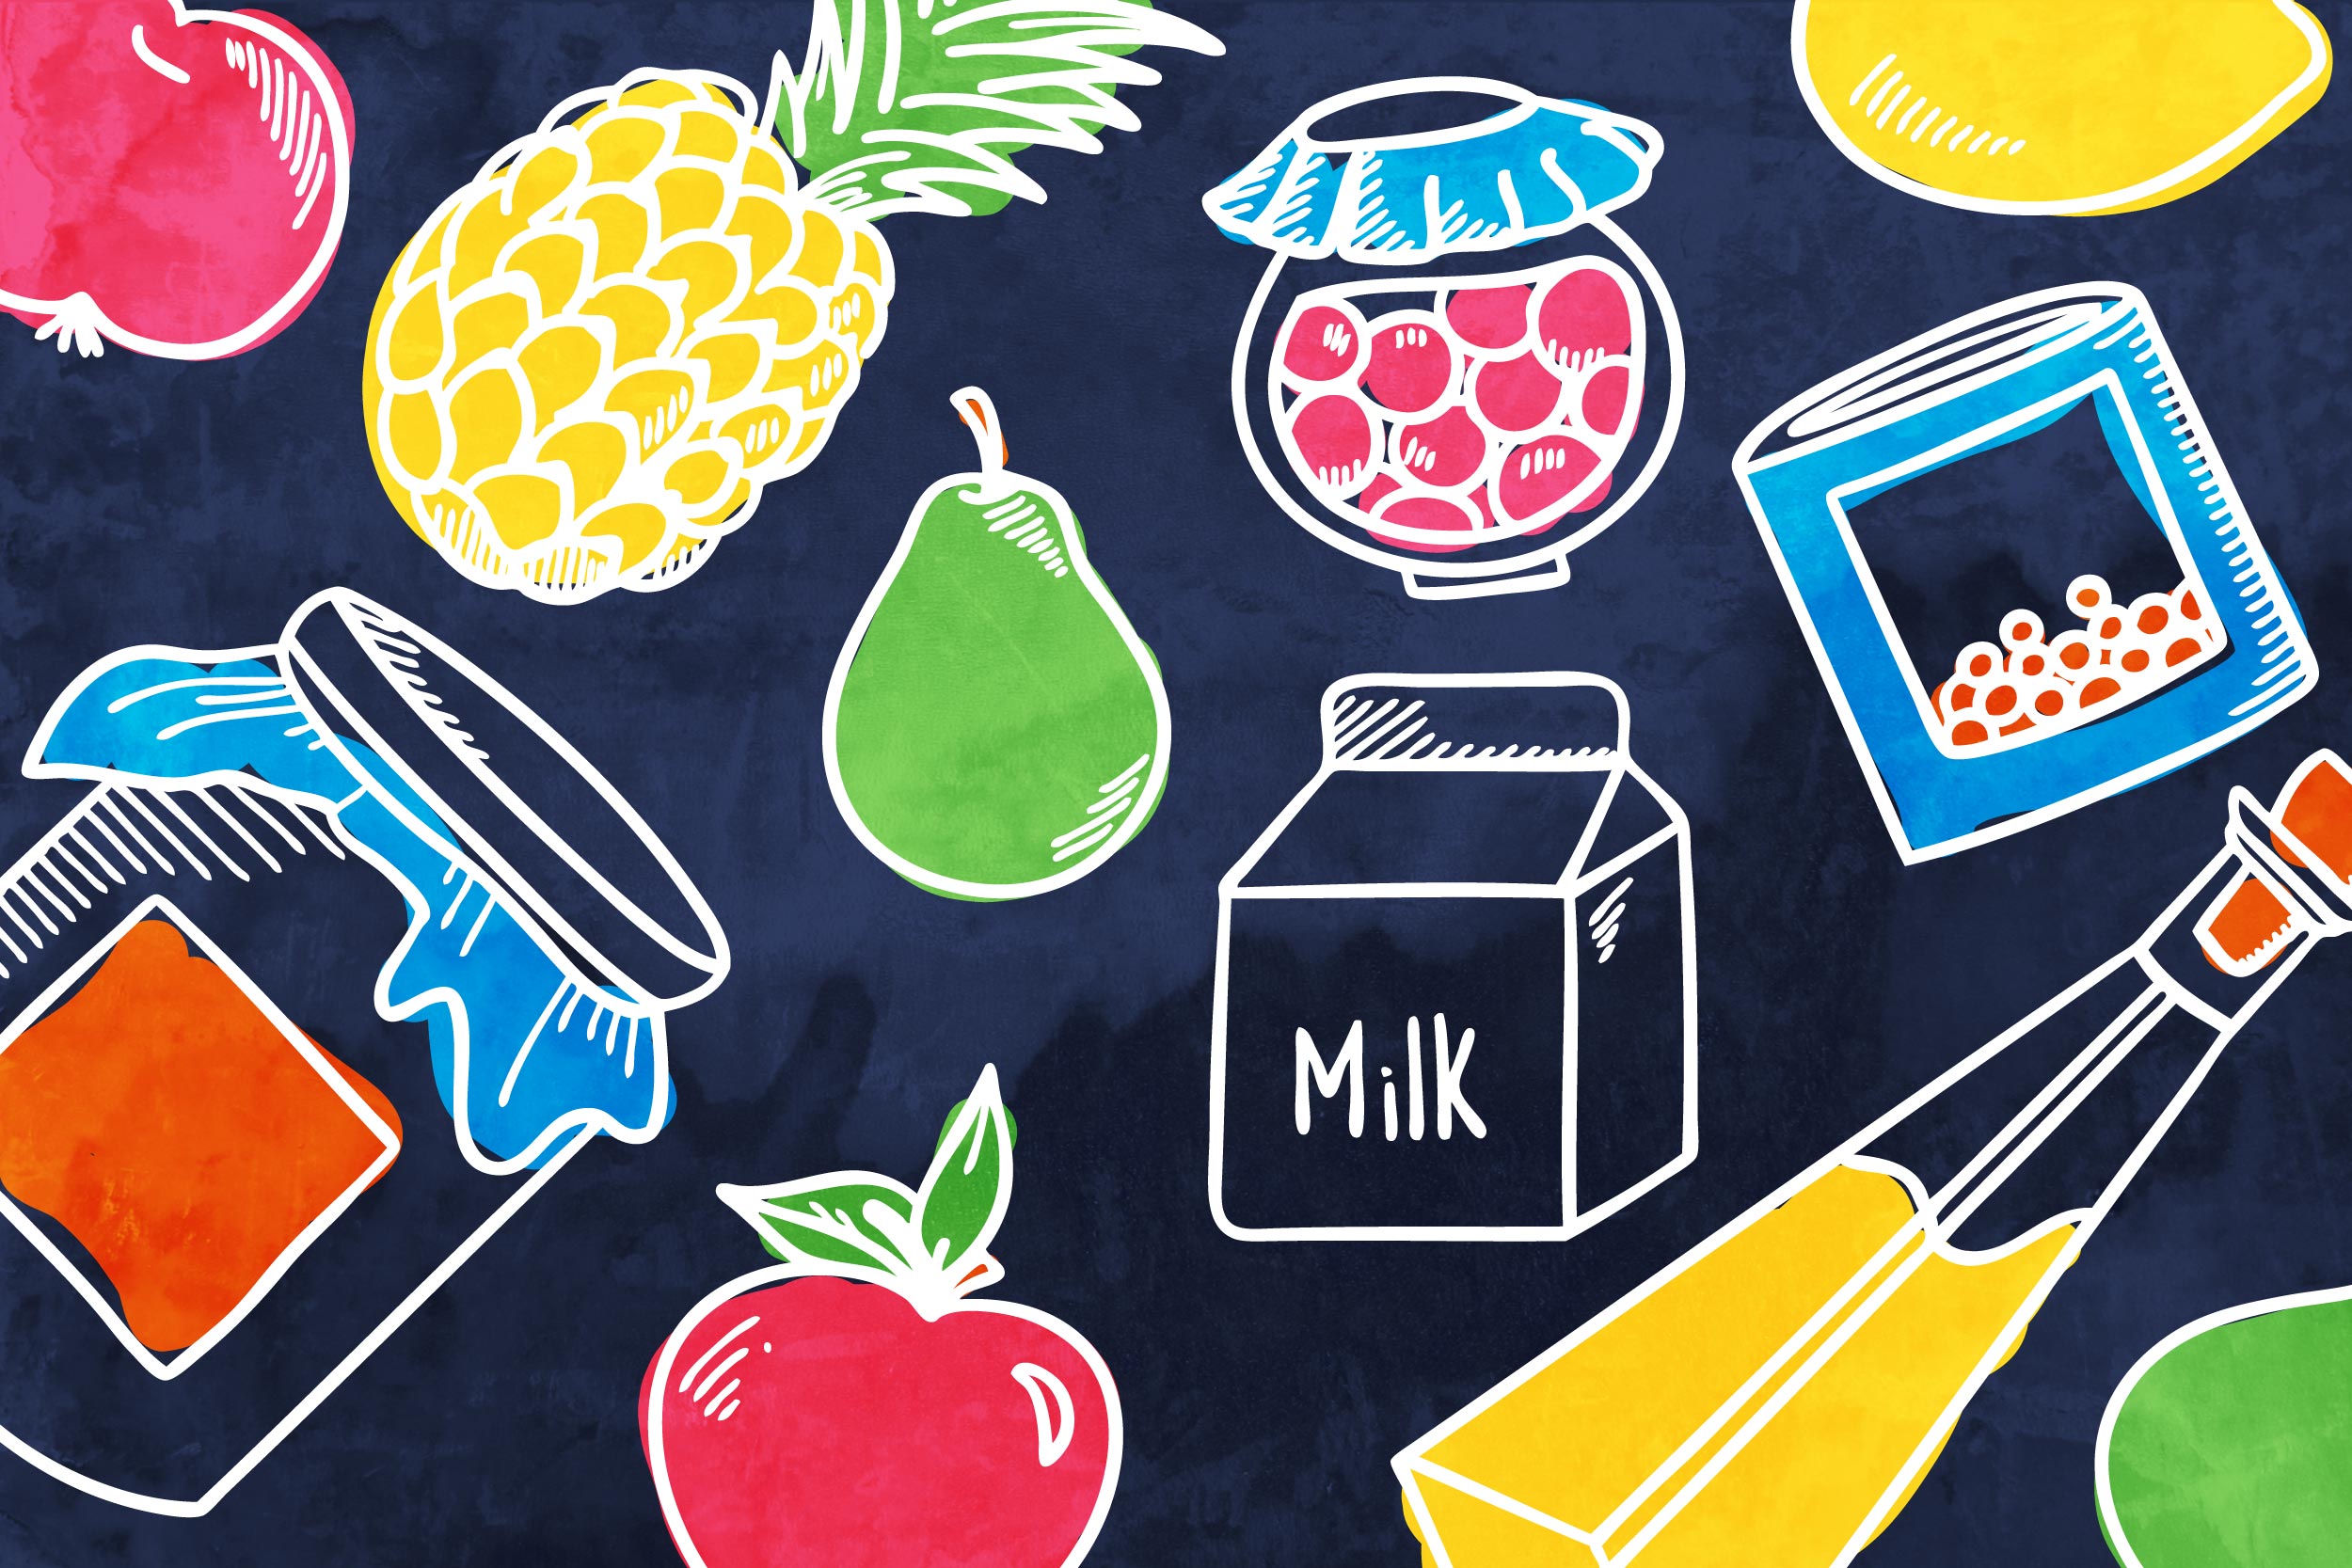 Illustration of various food items such as pear, pineapple milk, apples, etc.